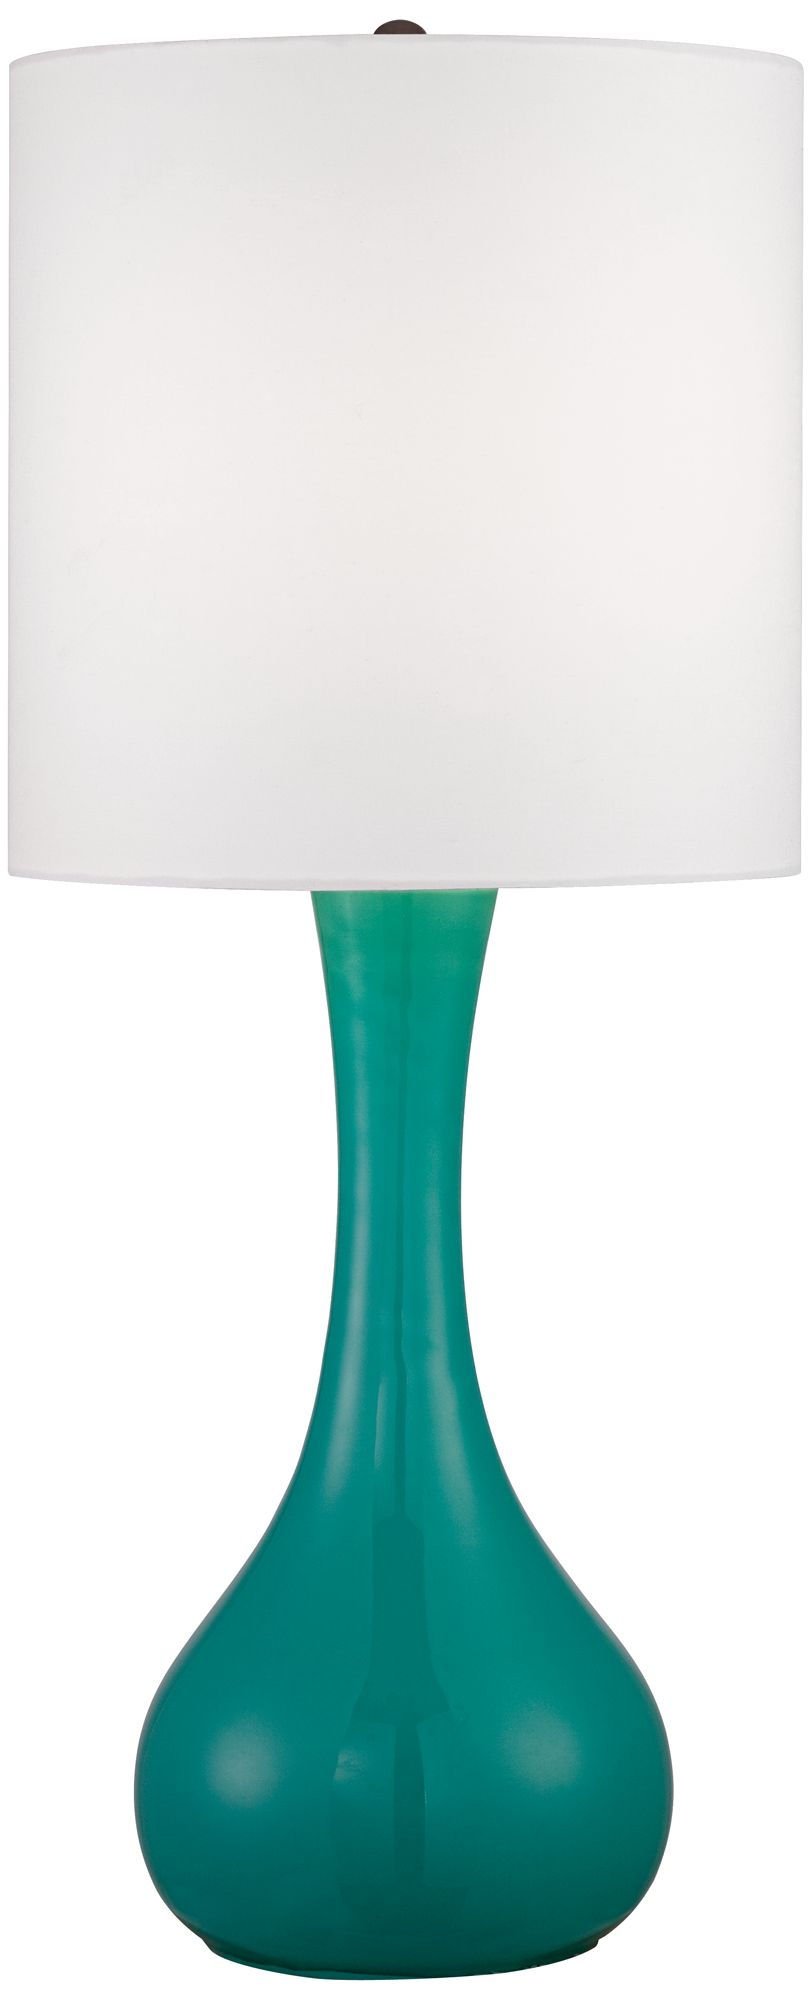 Turquoise Kiss Table Lamp - Image 0